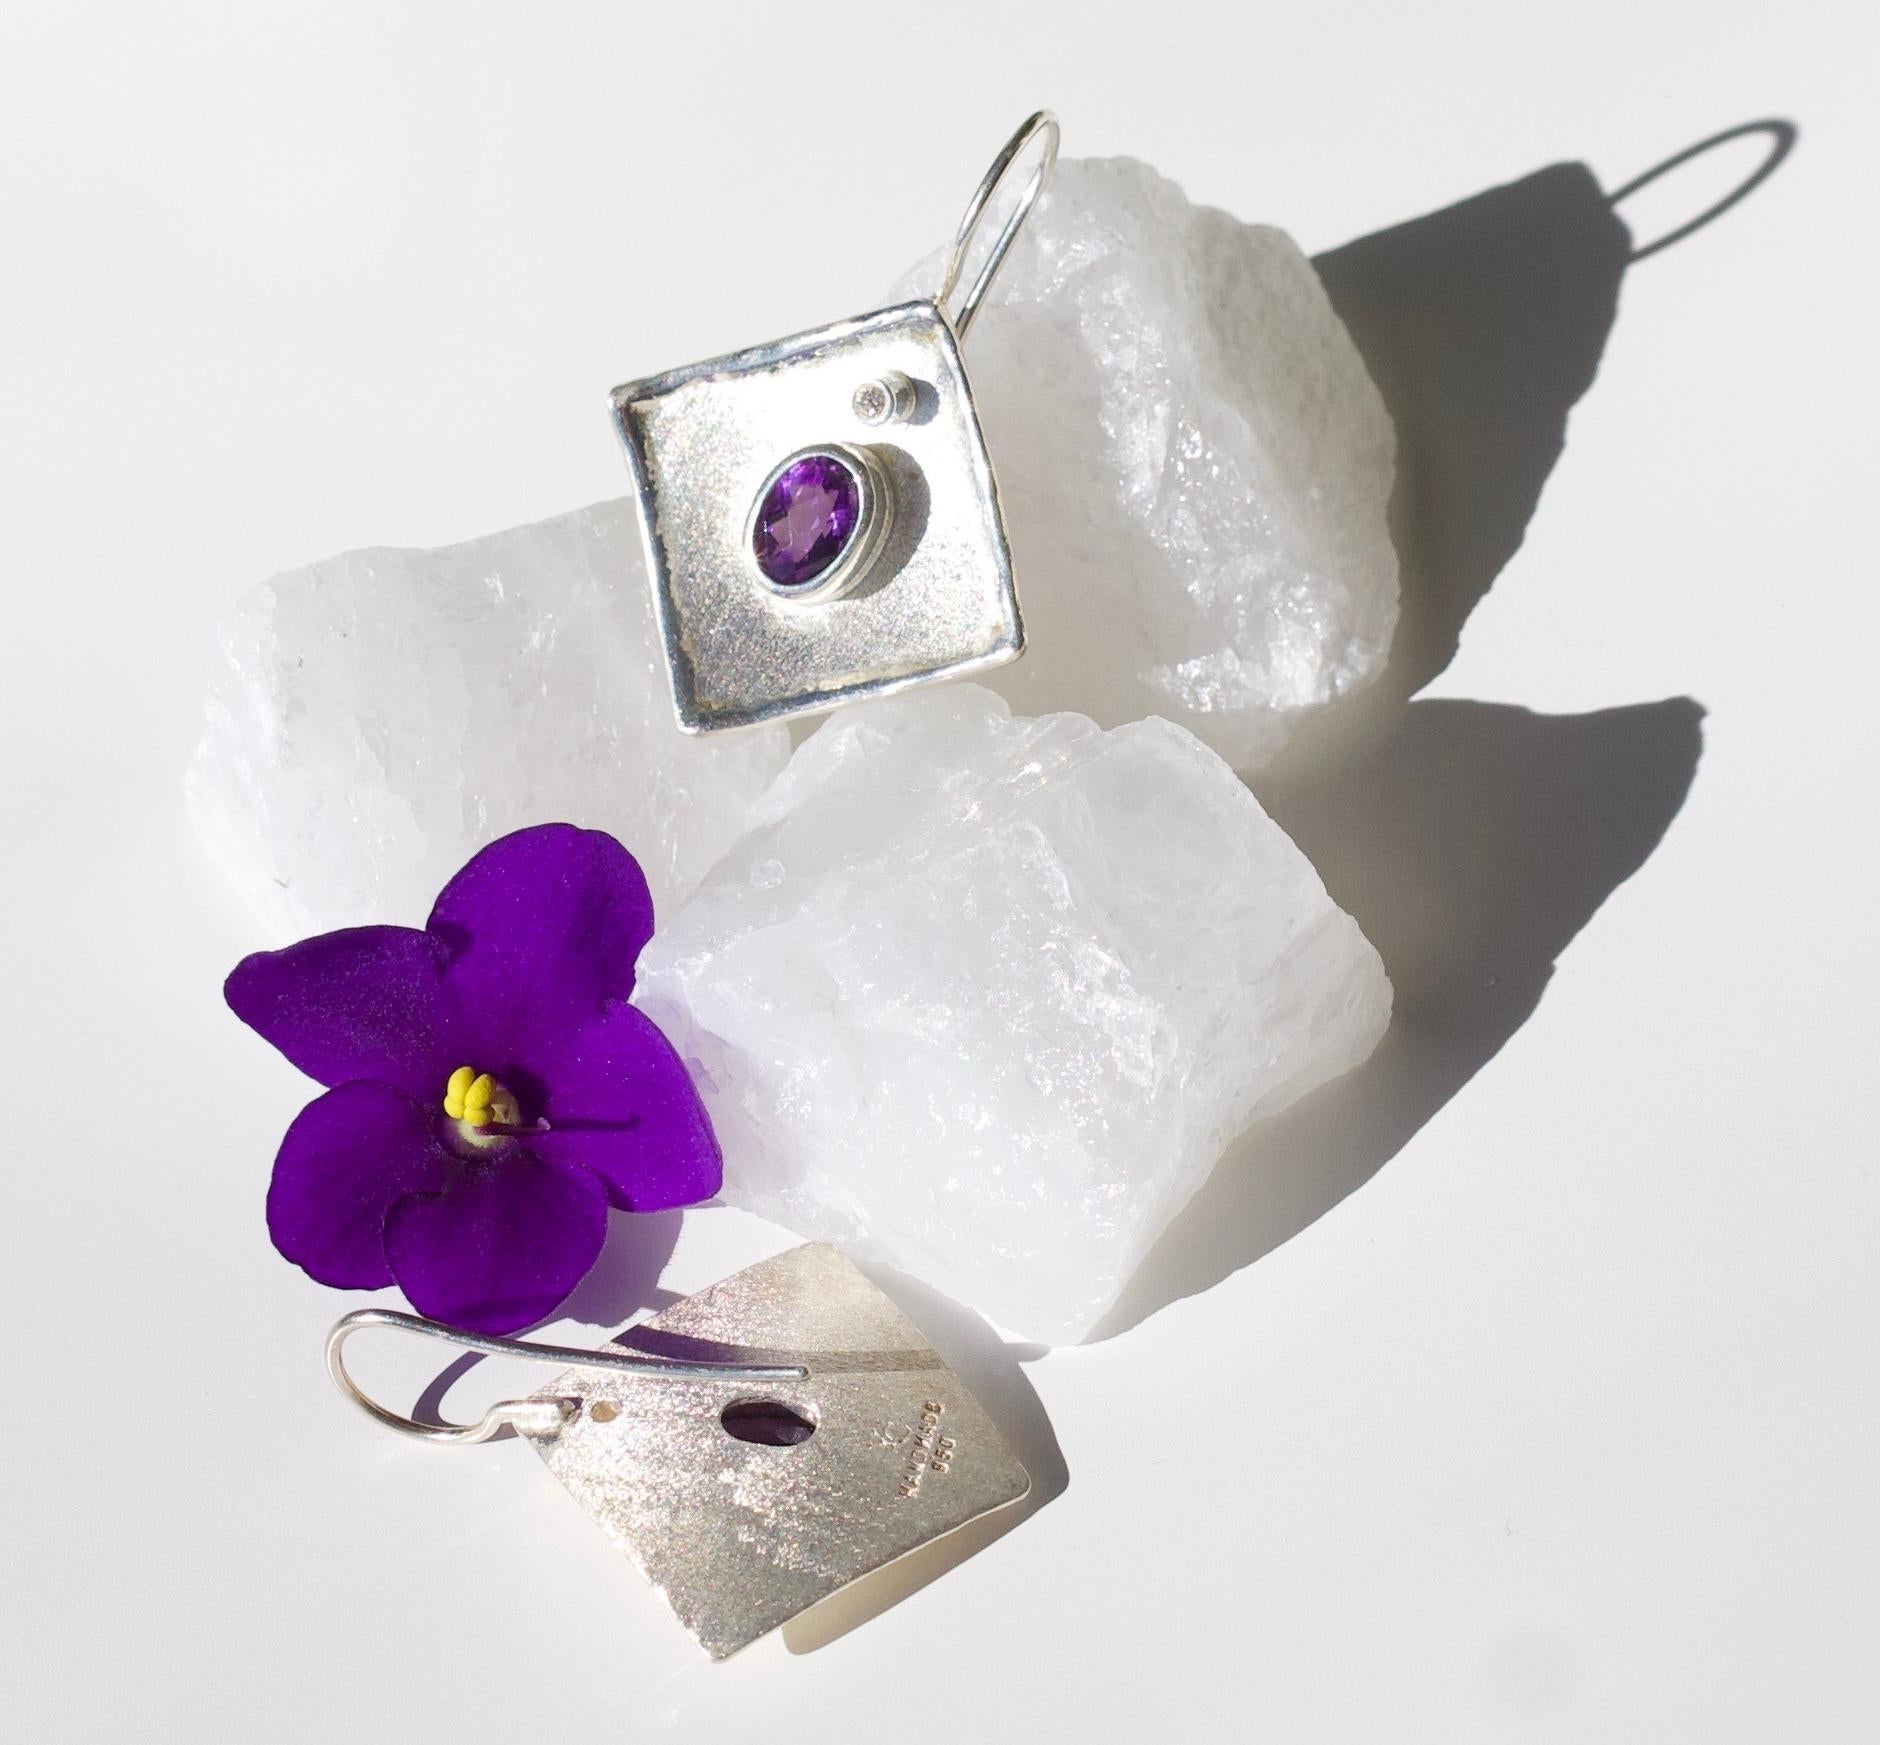 From Yianni Creations Ammos Collection, this is handmade artisan earrings from Fine Silver plated with palladium to resist against elements. Each earring feature 1.25 Carat oval cut Amethyst complimented by 0.03 Carat Brilliant cut Diamond. These